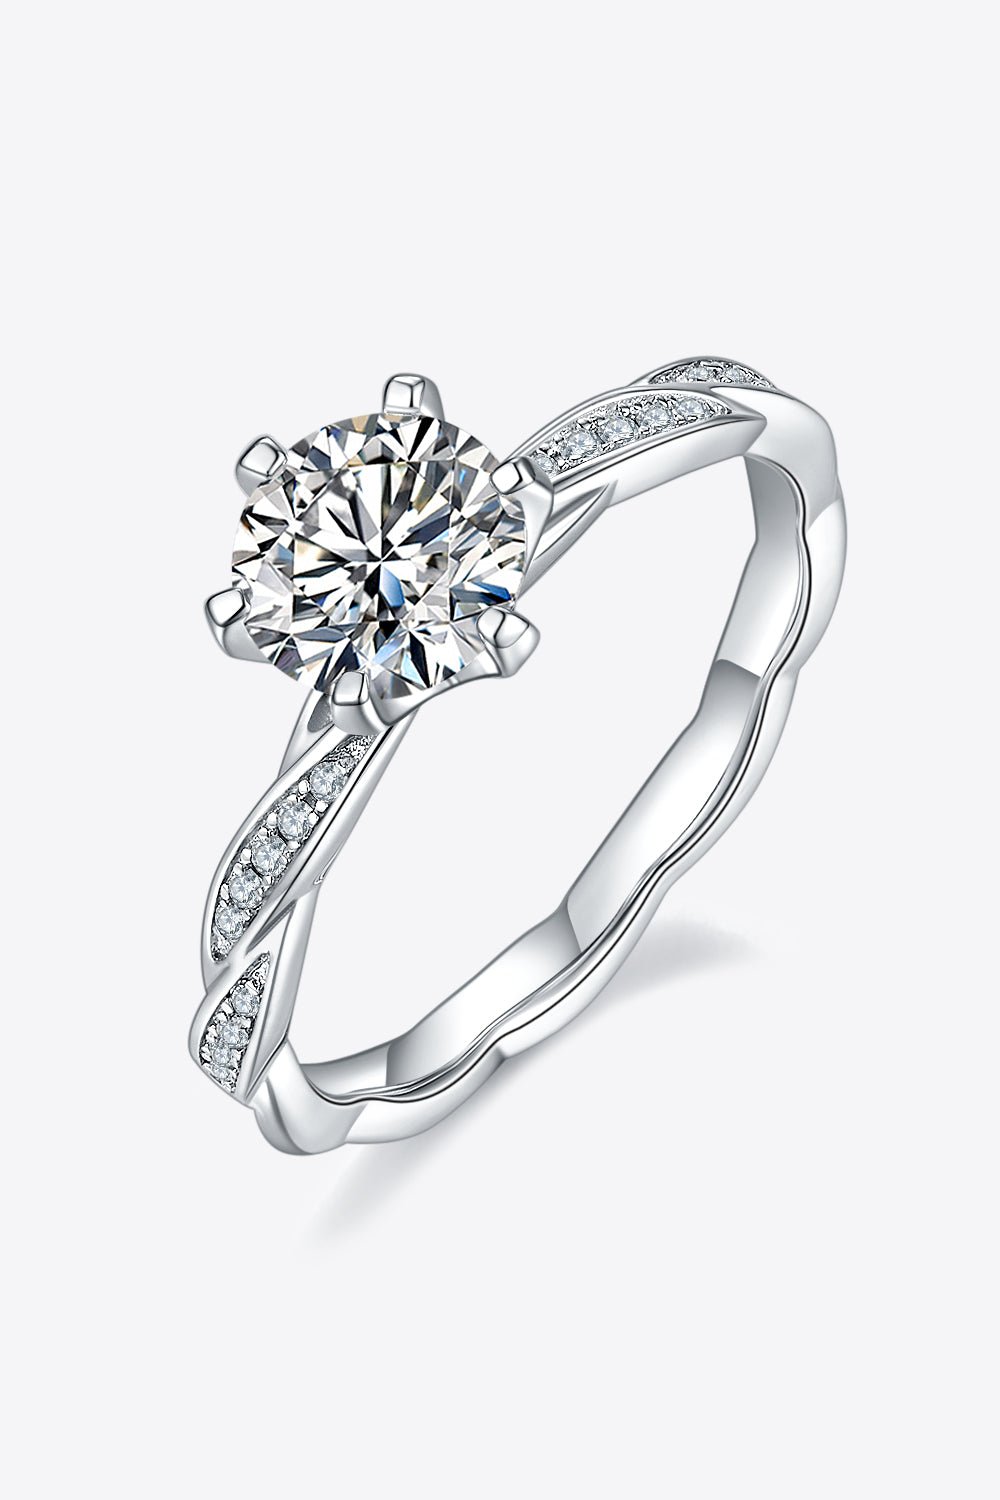 1 Carat Moissanite 925 Sterling Silver Ring - Uylee's Boutique